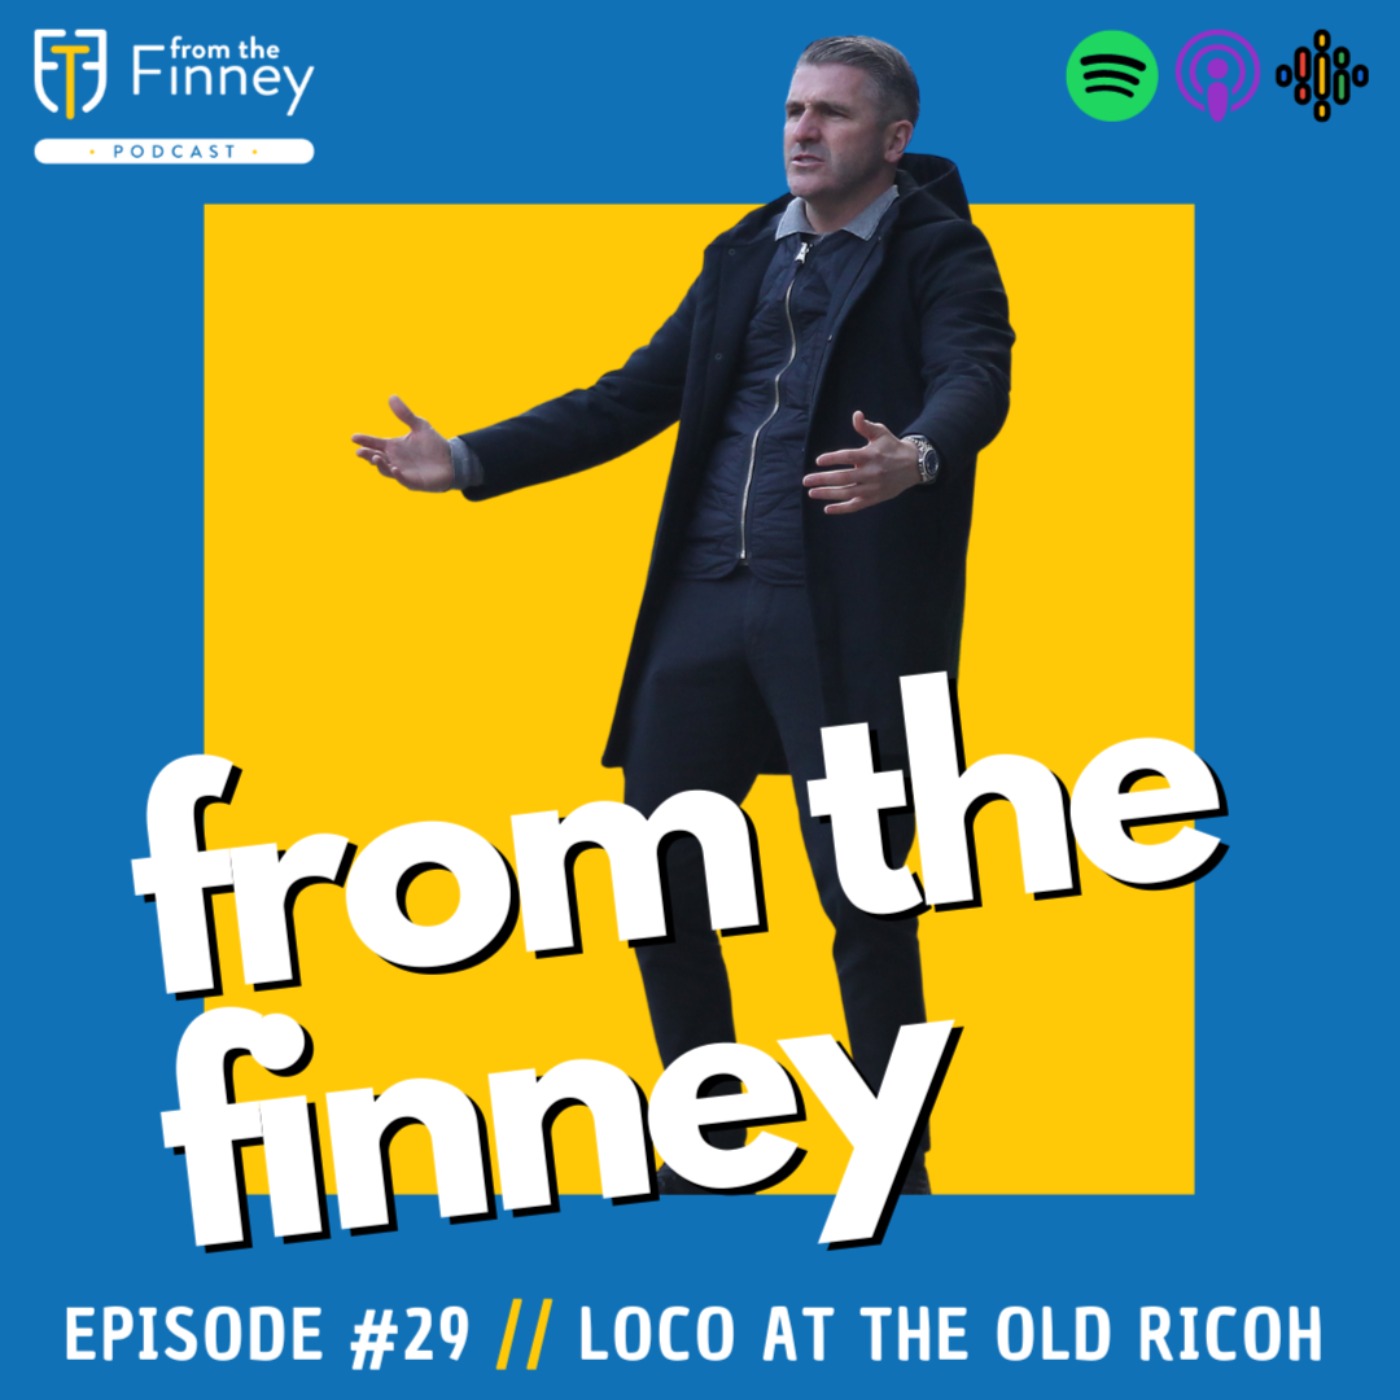 Episode #30 // Loco at the old Ricoh // From the Finney Podcast